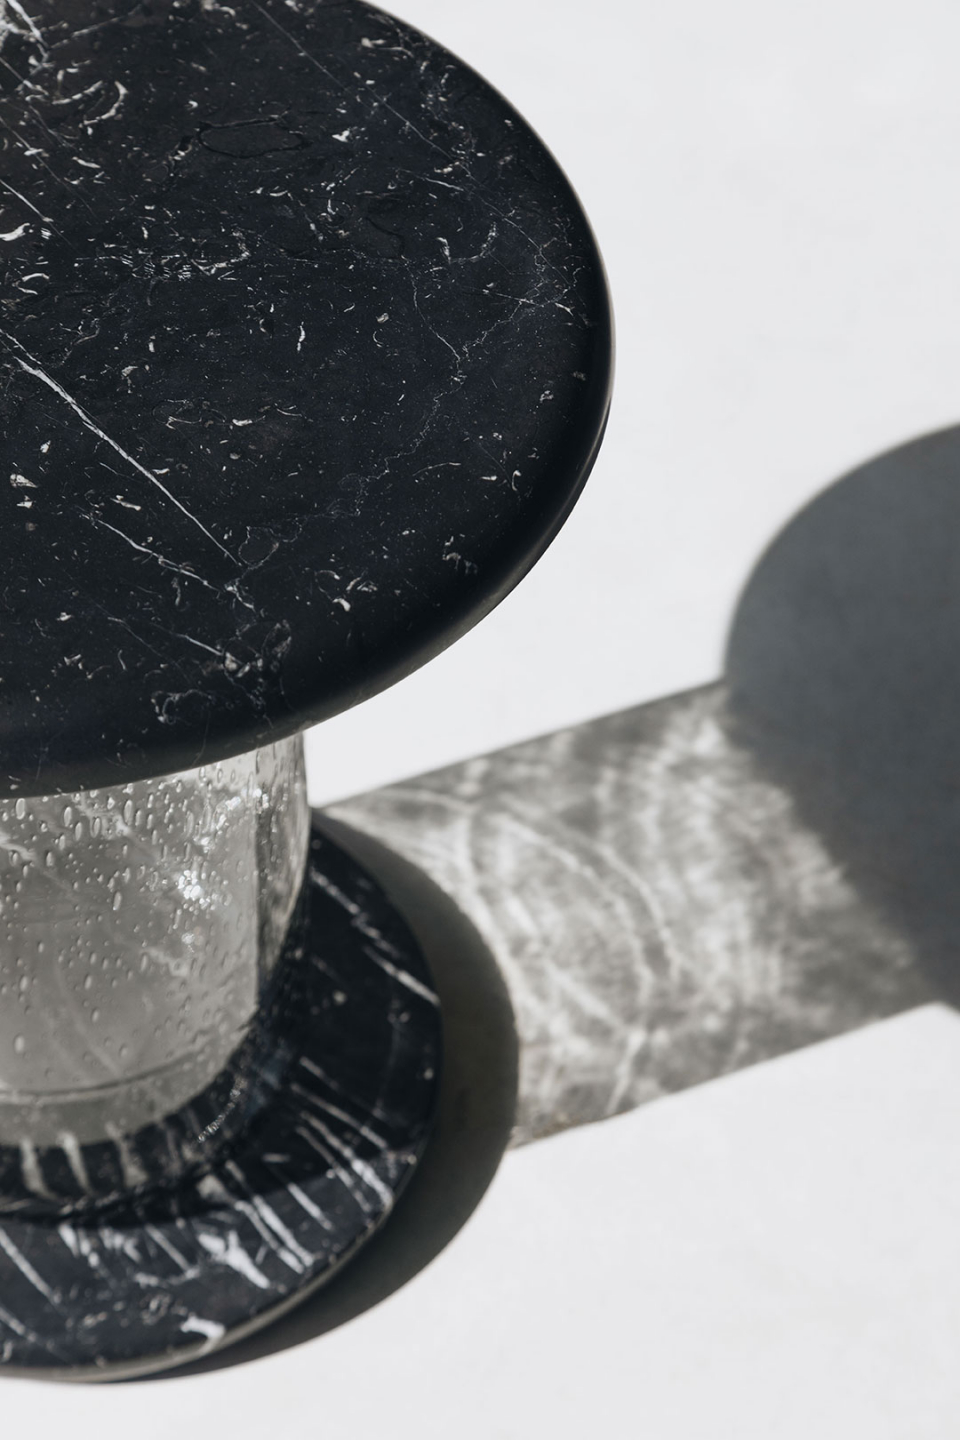 BUBBLE NERO MARQUINA image 3 | Marble Side Tables | MAAMI HOME 